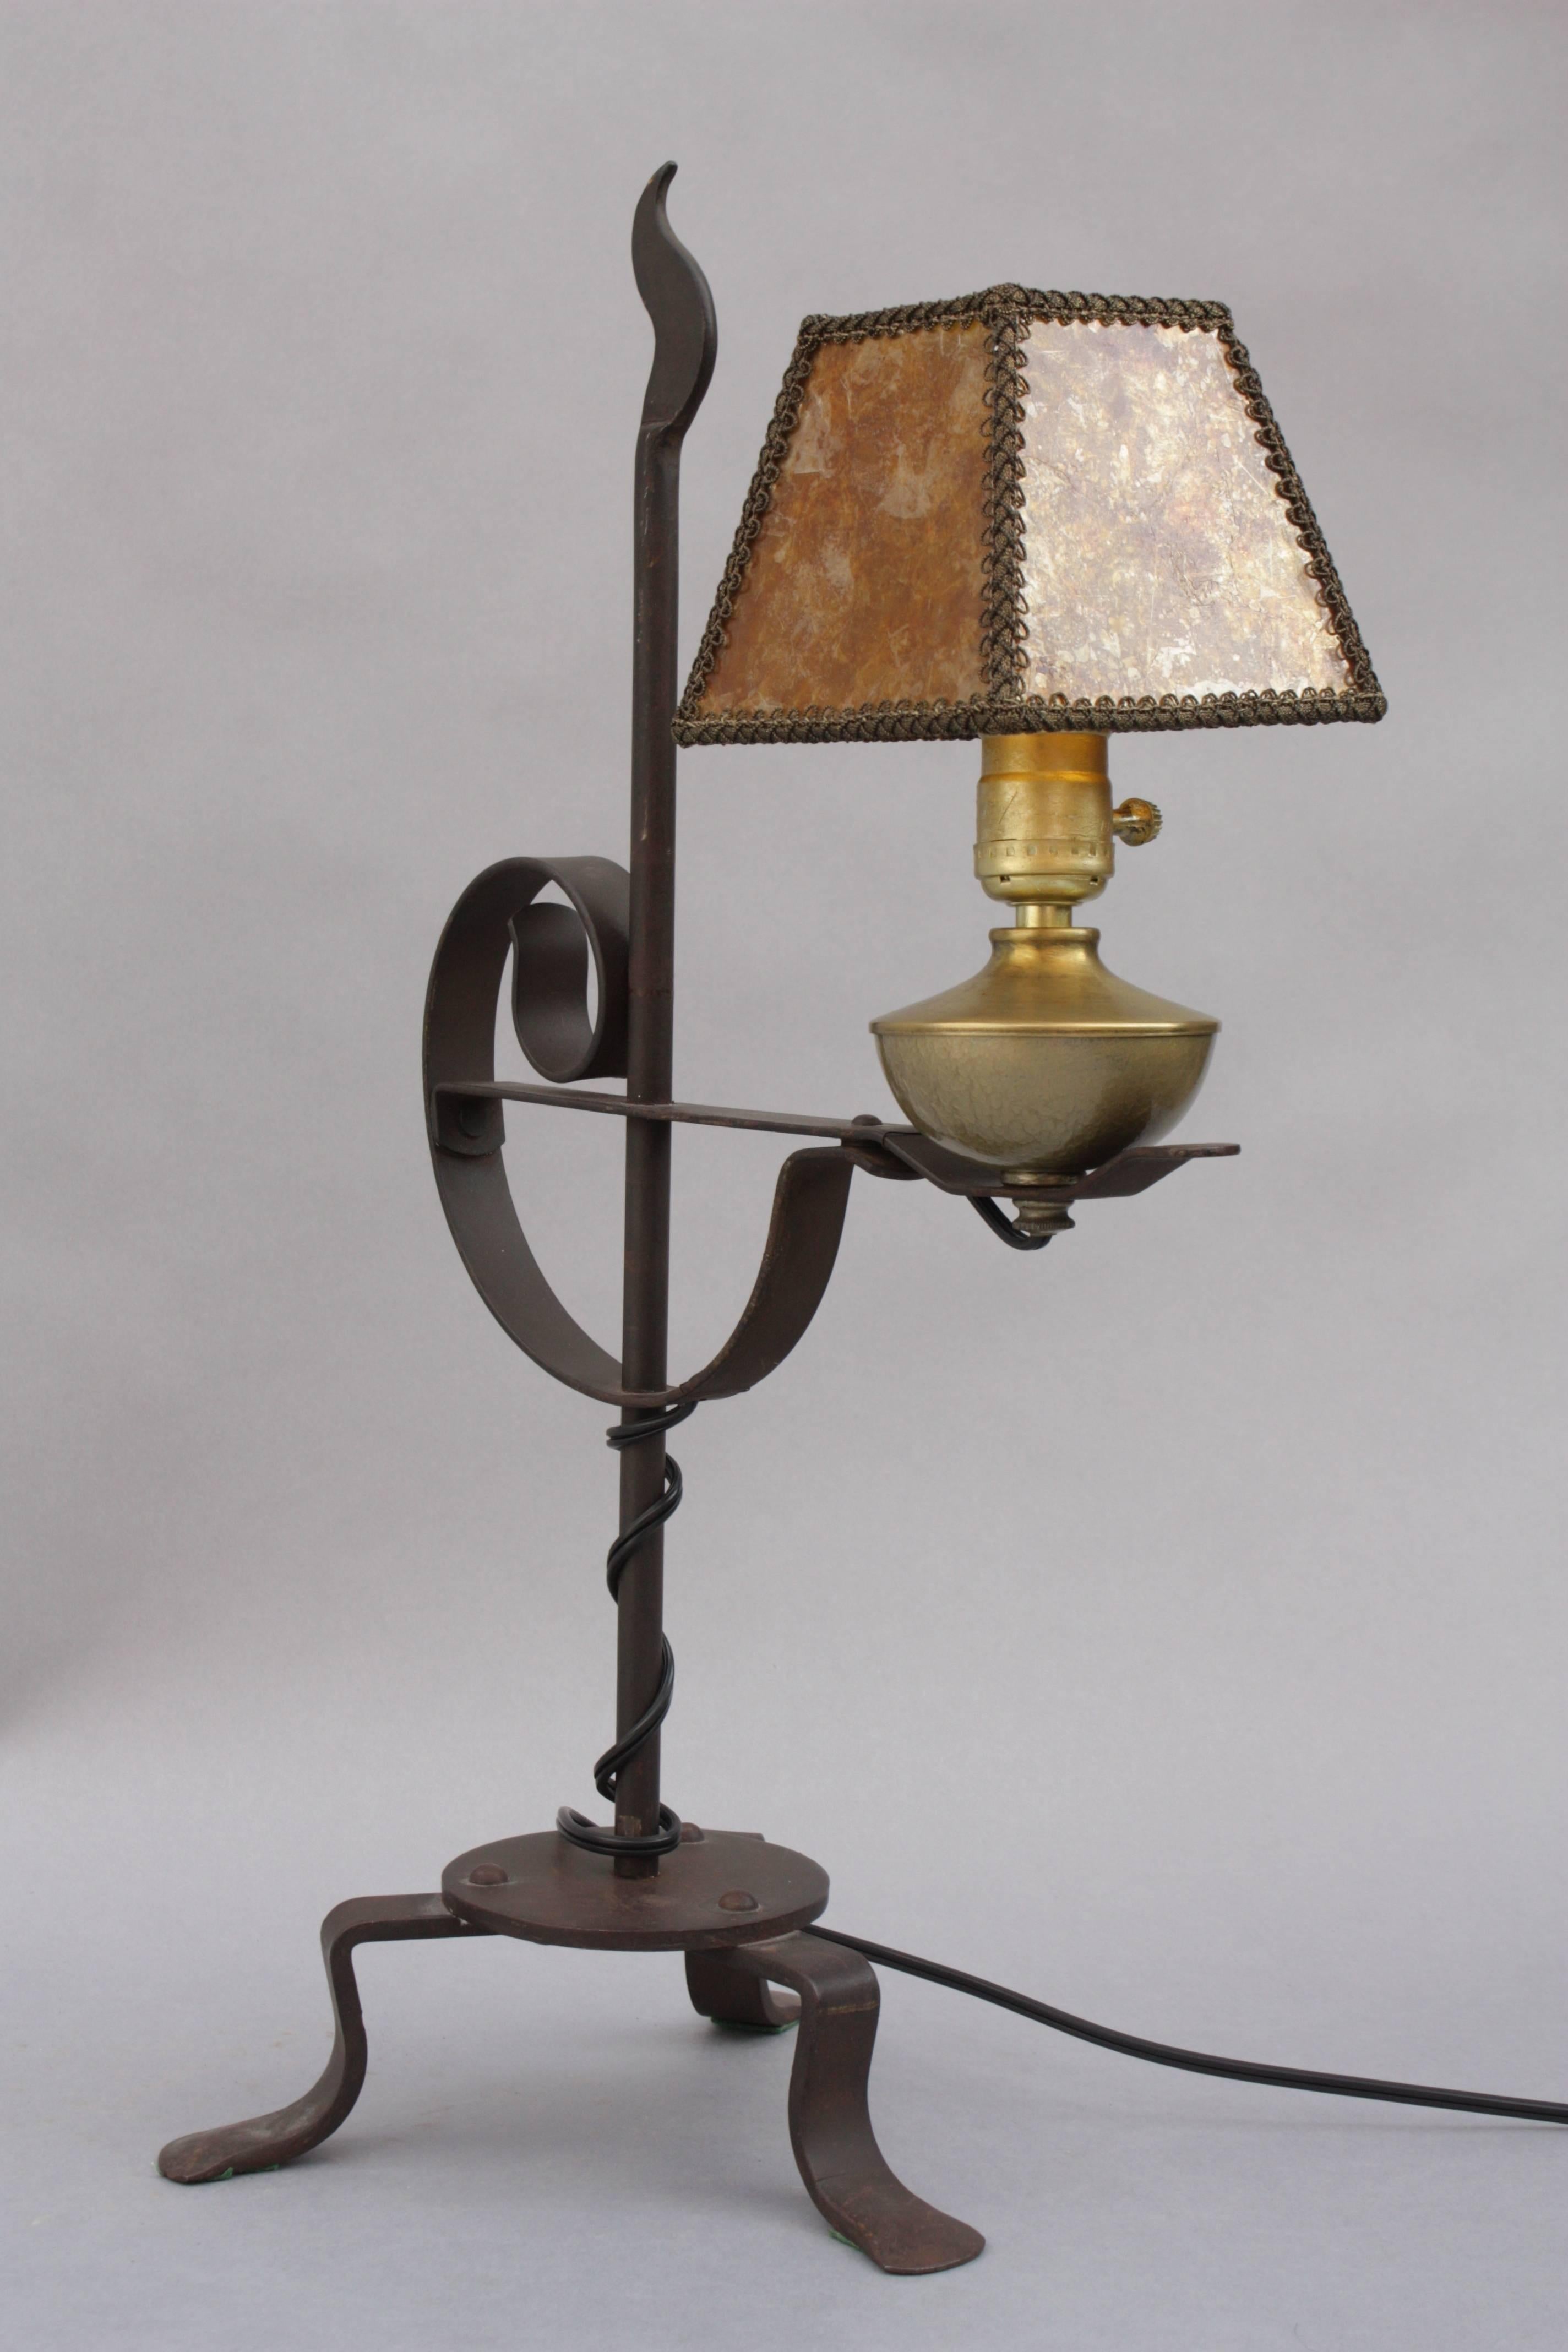 Adjustable height wrought iron table lamp.